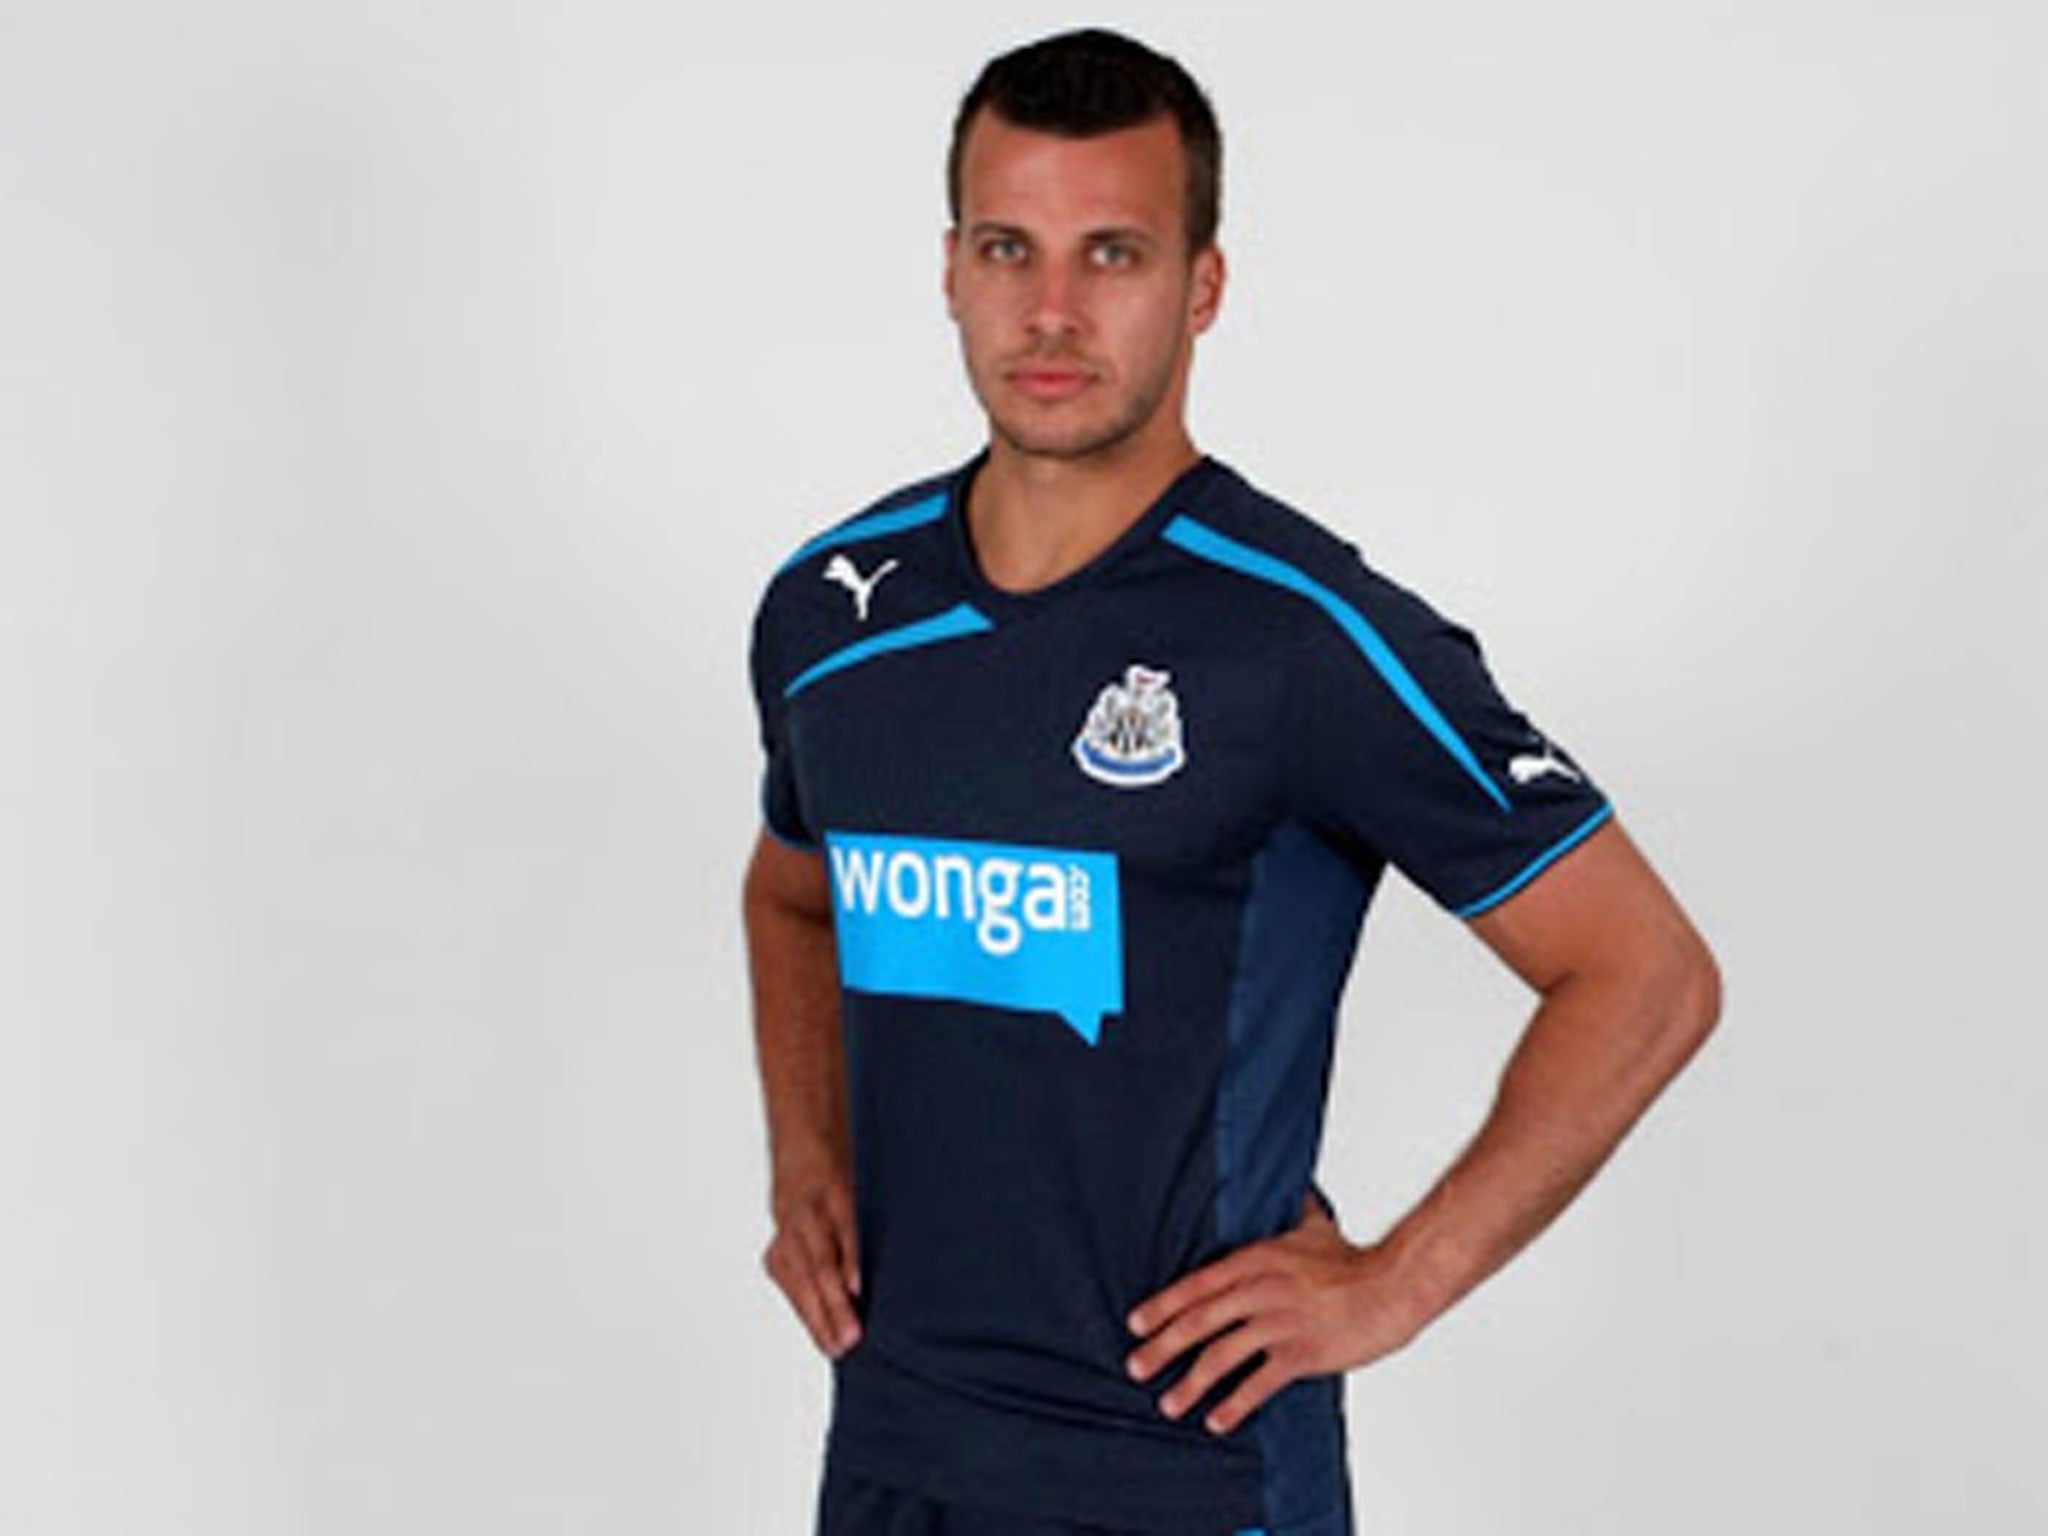 Newcastle's away kit, with its controversial sponsor, appears to be of slick design